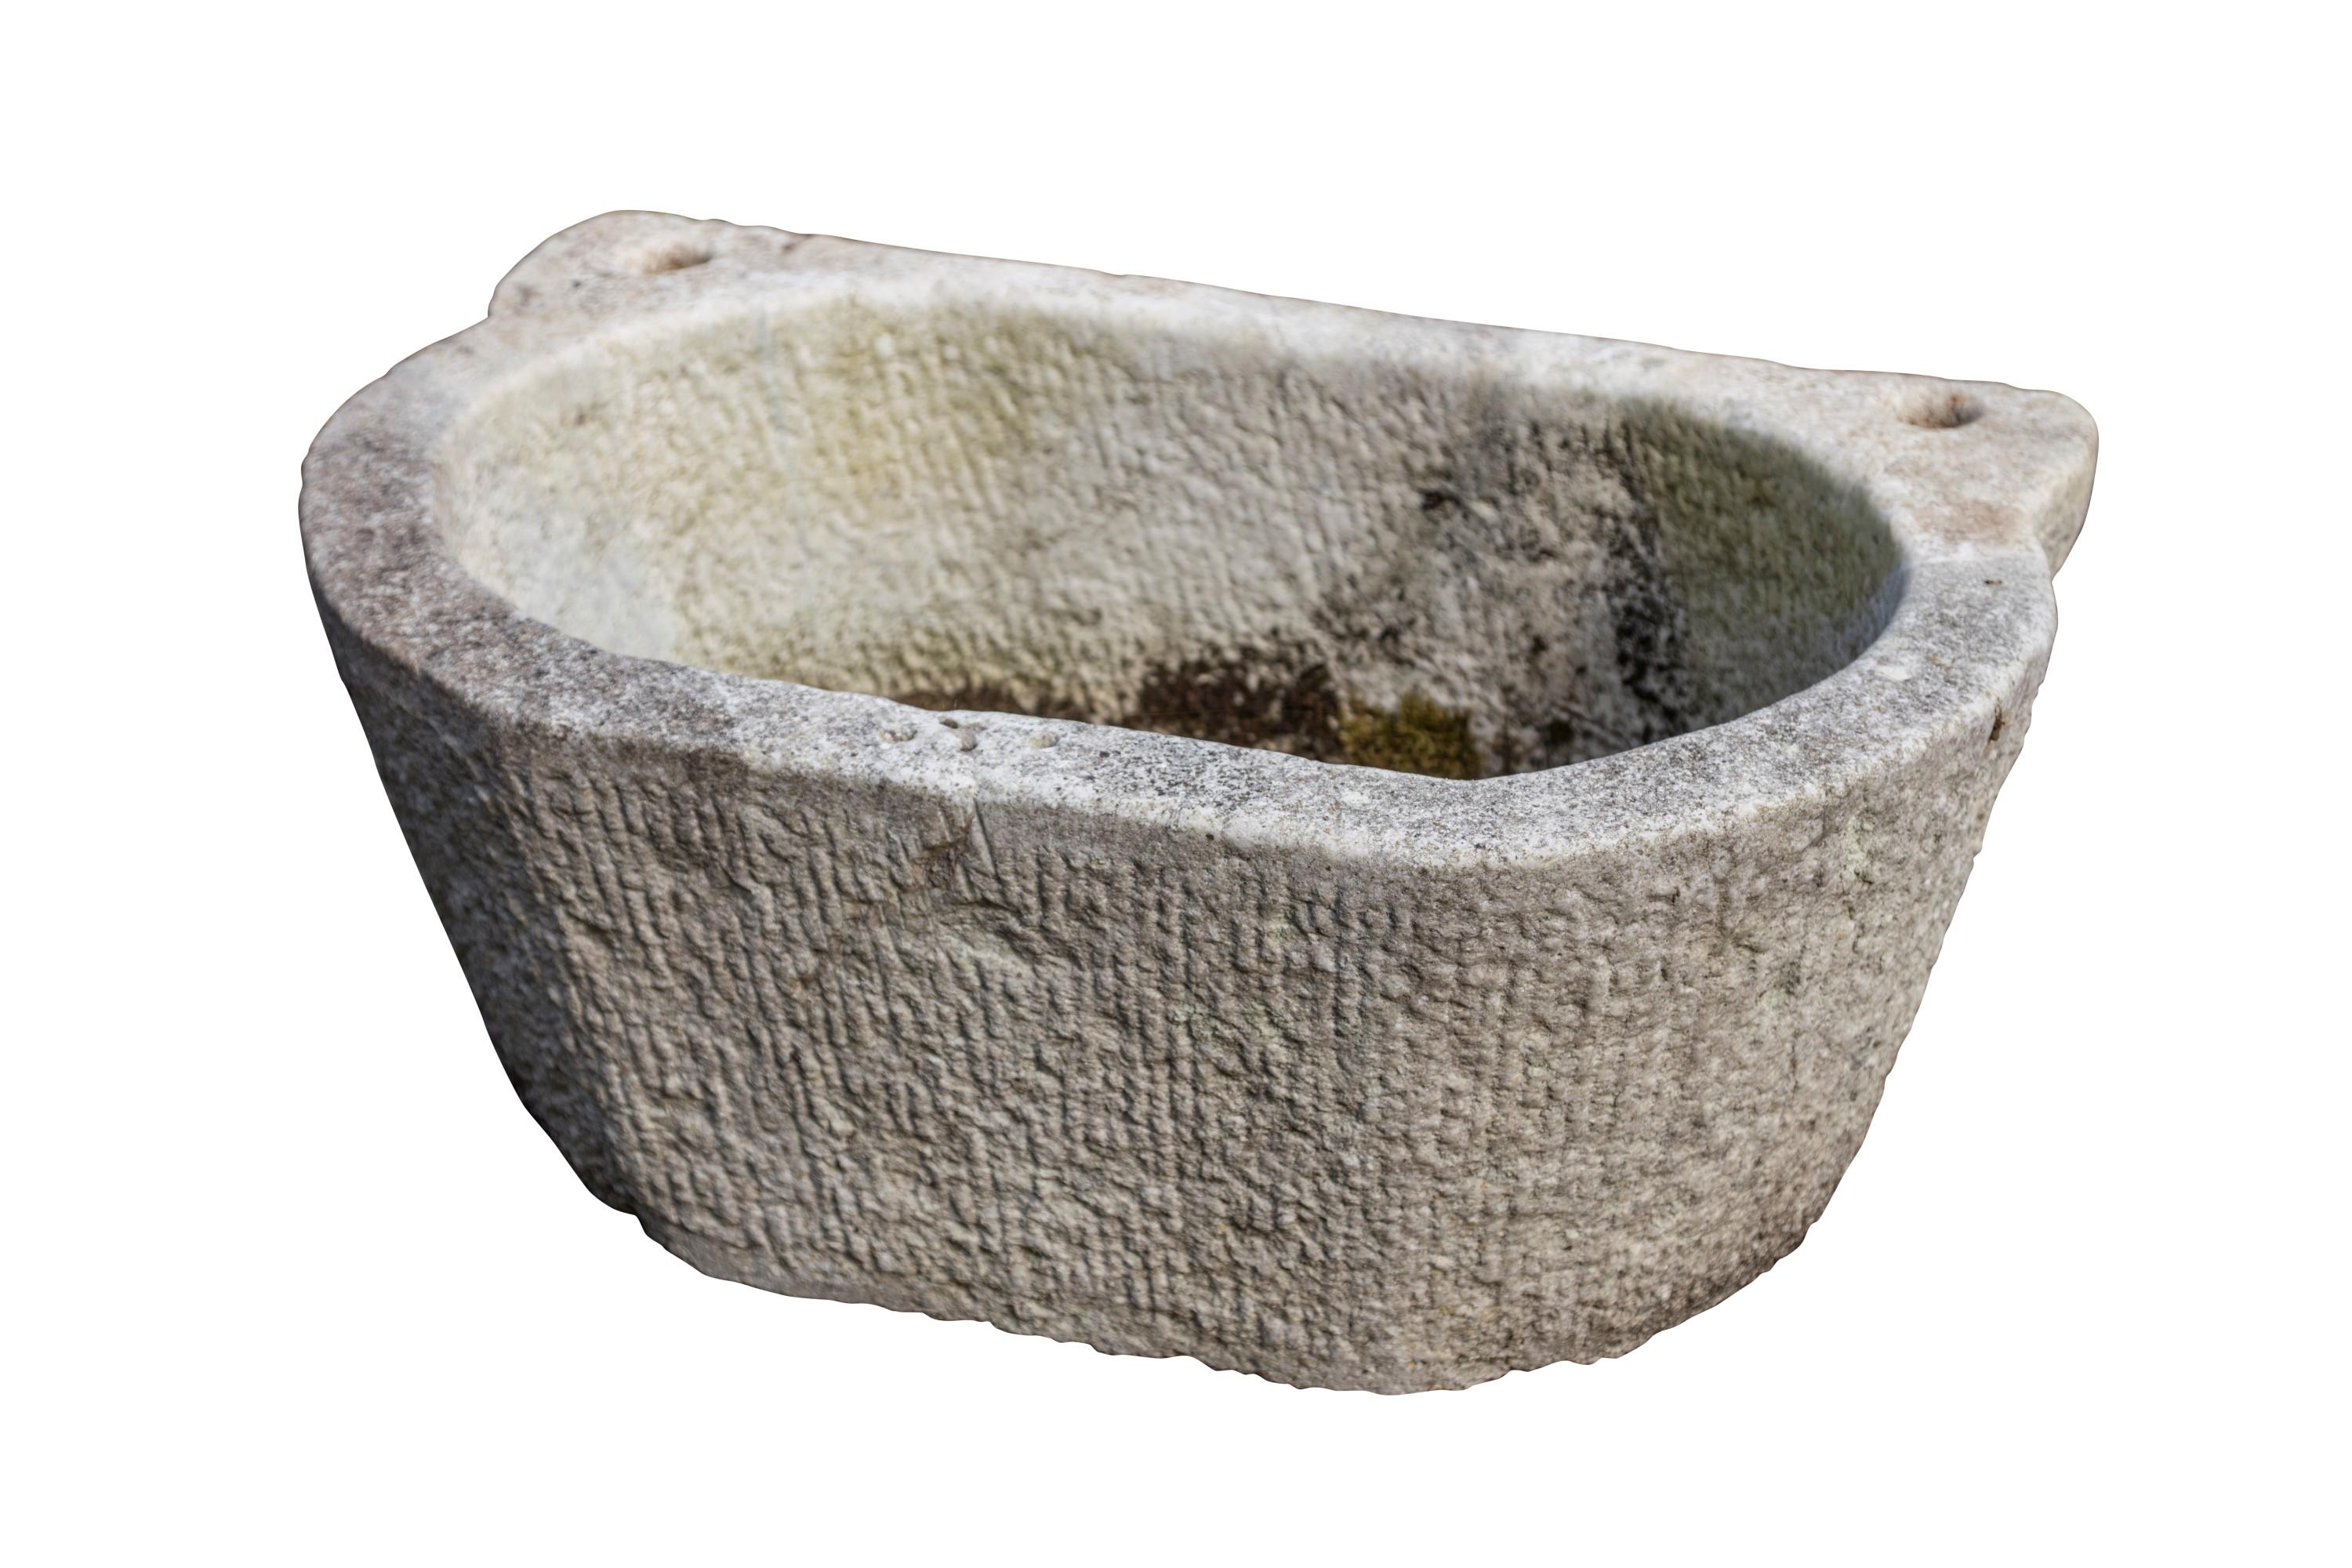 Mid-19th century solid marble bath. Used for washing horse’s feet. To use as a planter, the bath would require drainage holes which can be carried out on site.
Weight approx 250kg